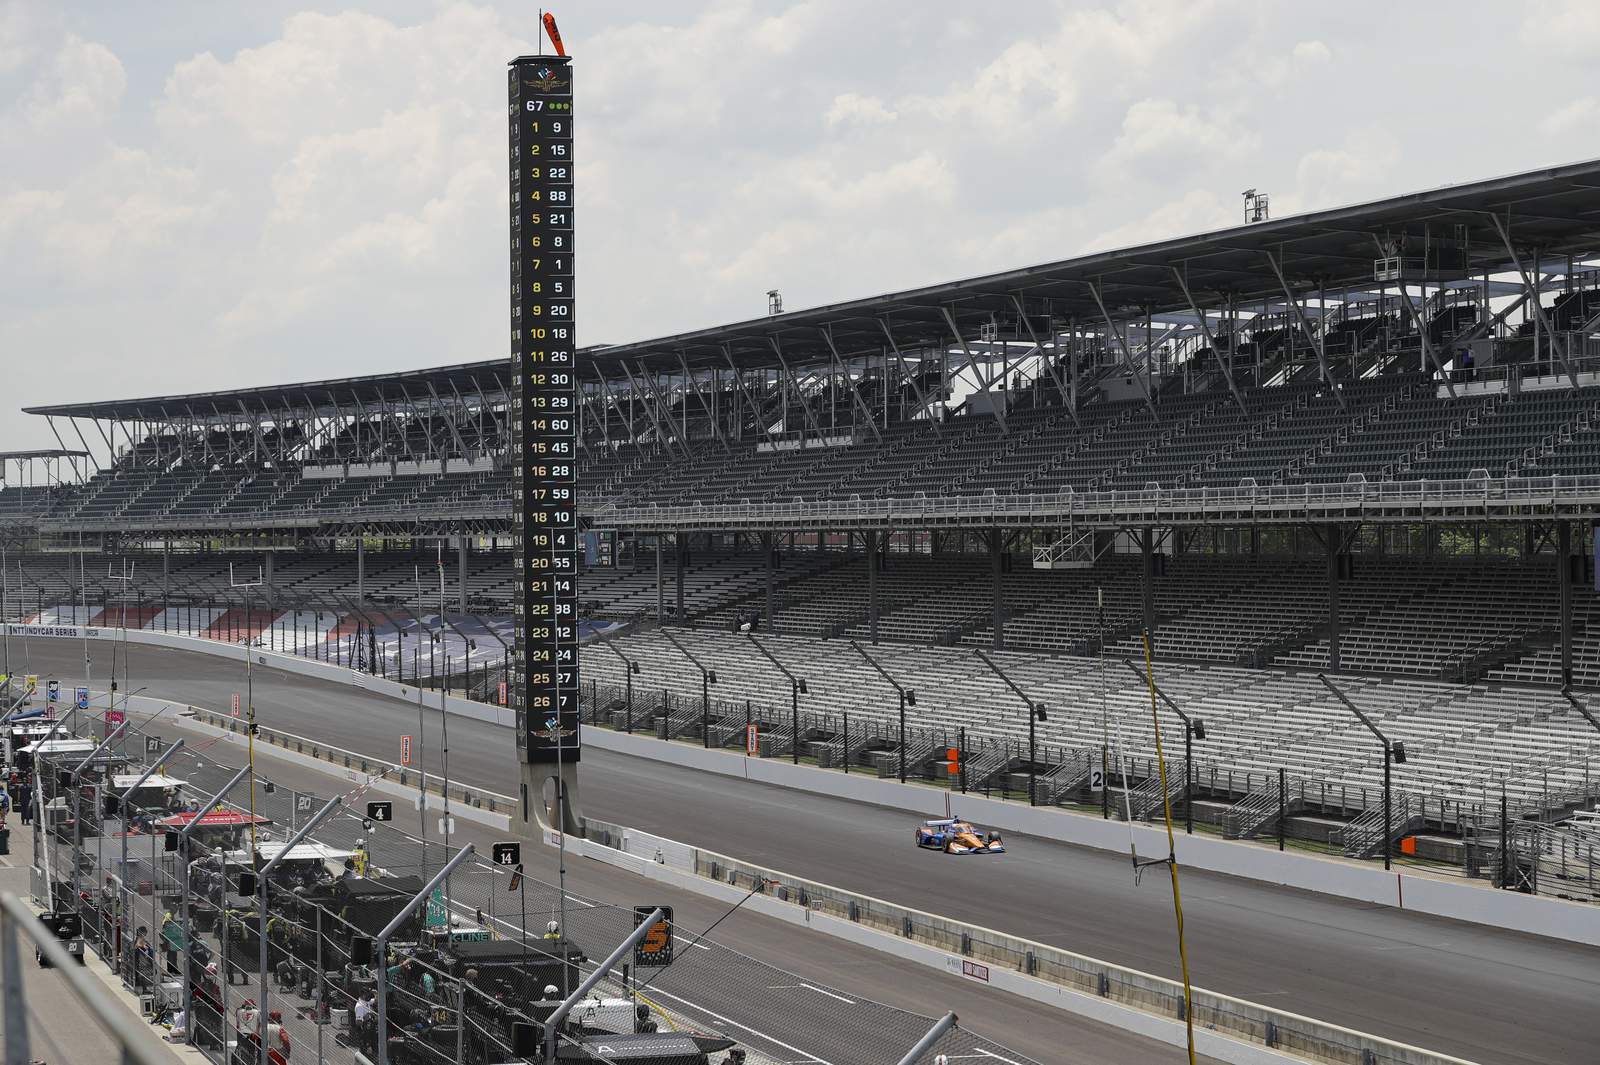 Indianapolis 500 attendance limited to 25% capacity